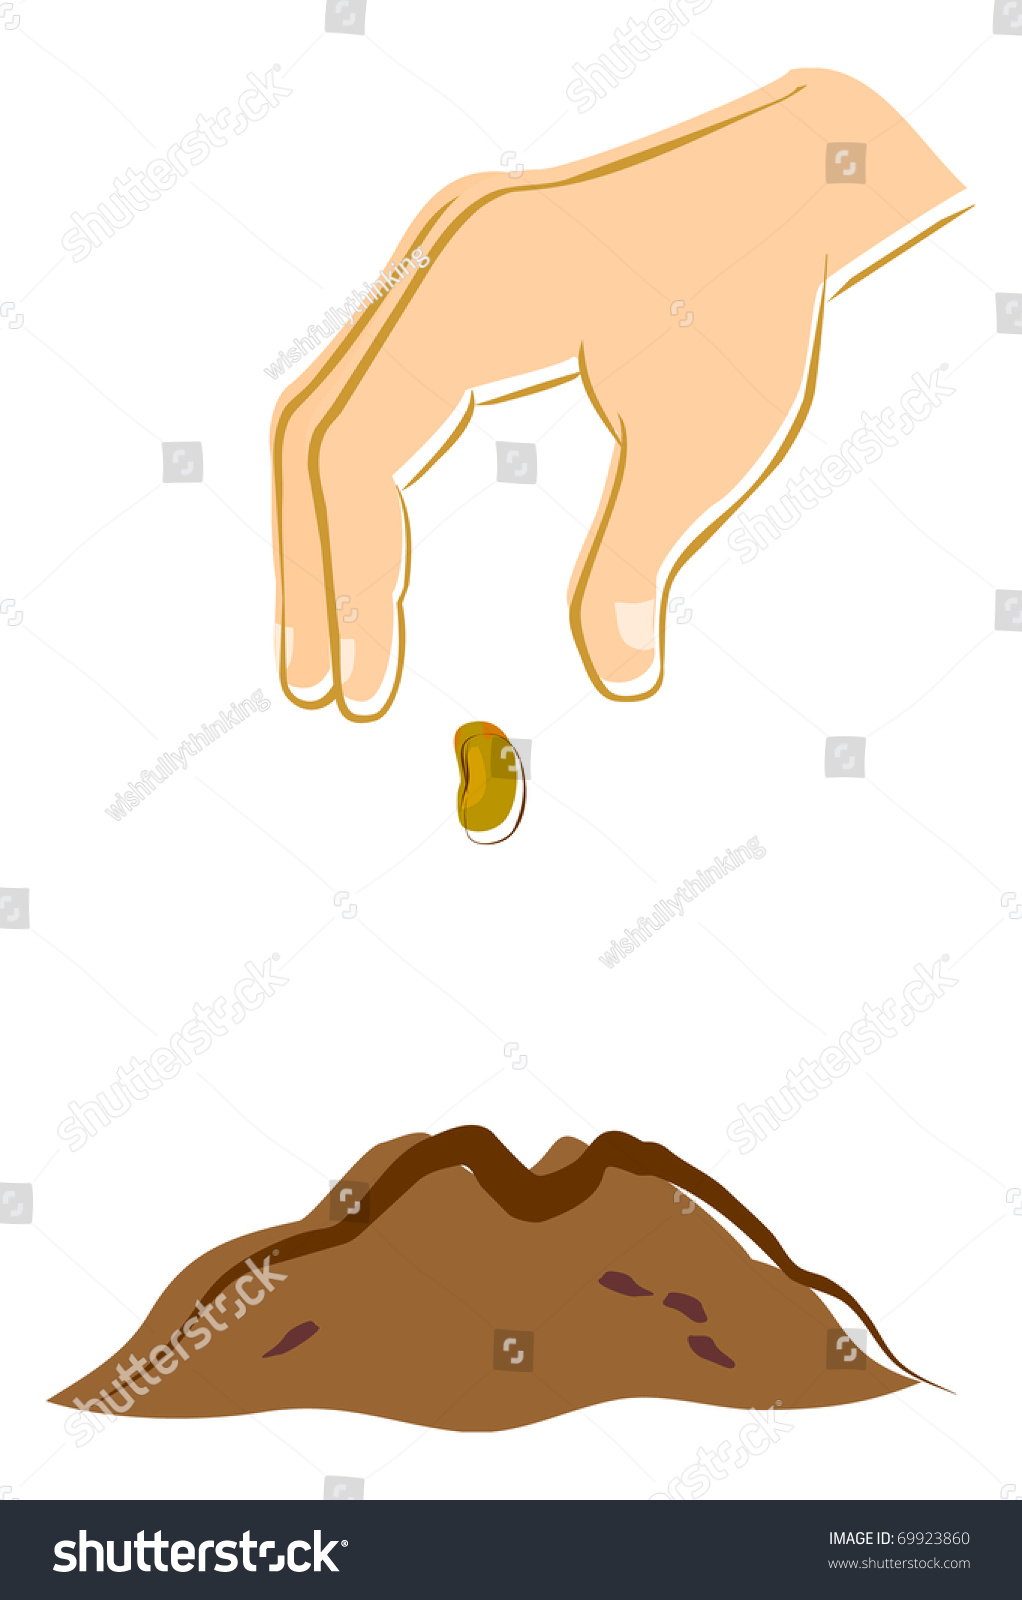 clipart planting seeds - photo #18